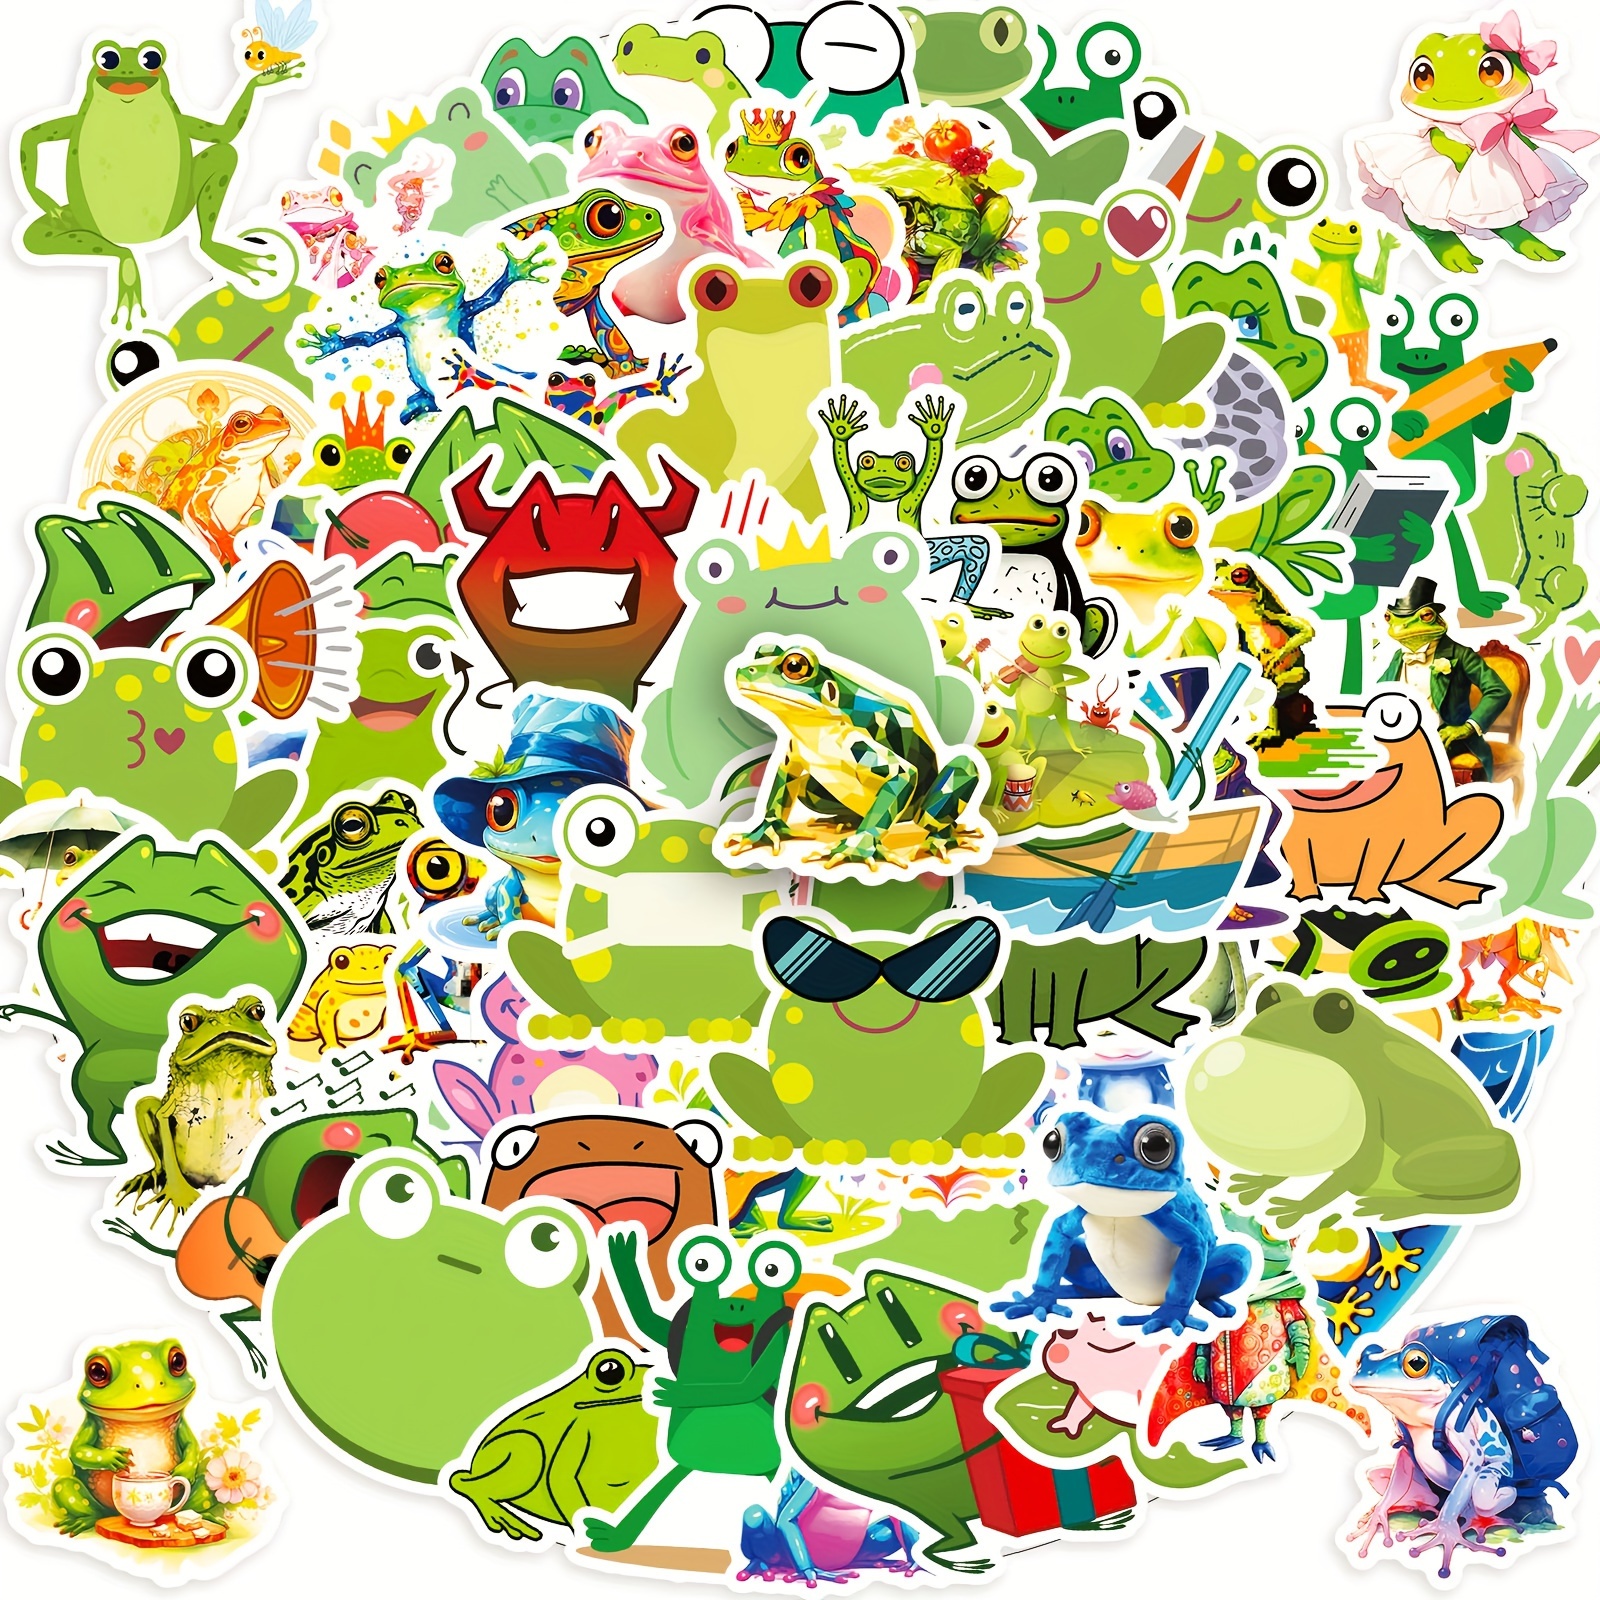  Anime Stickers - 50Pcs Japanese Cartoon Stickers Waterproof  Vinyl Cute Stickers for Laptop Guitar Water Bottle Luggage Bike Kids Teens  Adults Party Supplies Decoration : Toys & Games